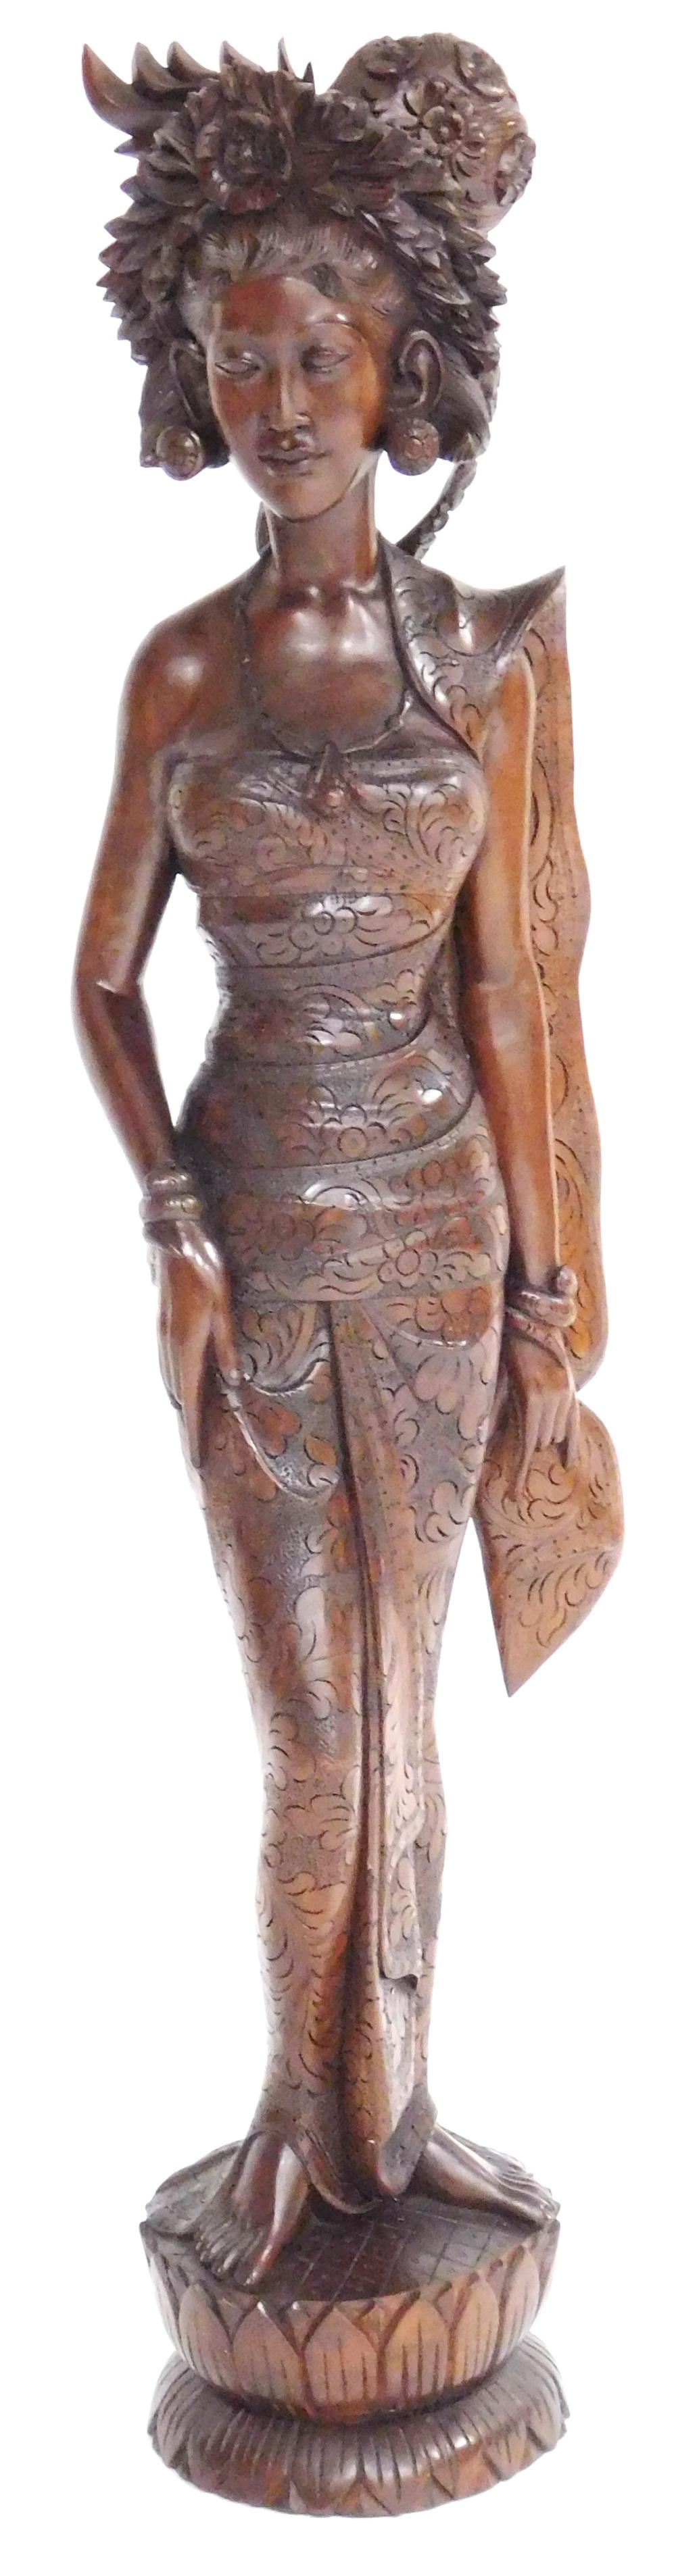 ASIAN: BALINESE CARVED SCULPTURE